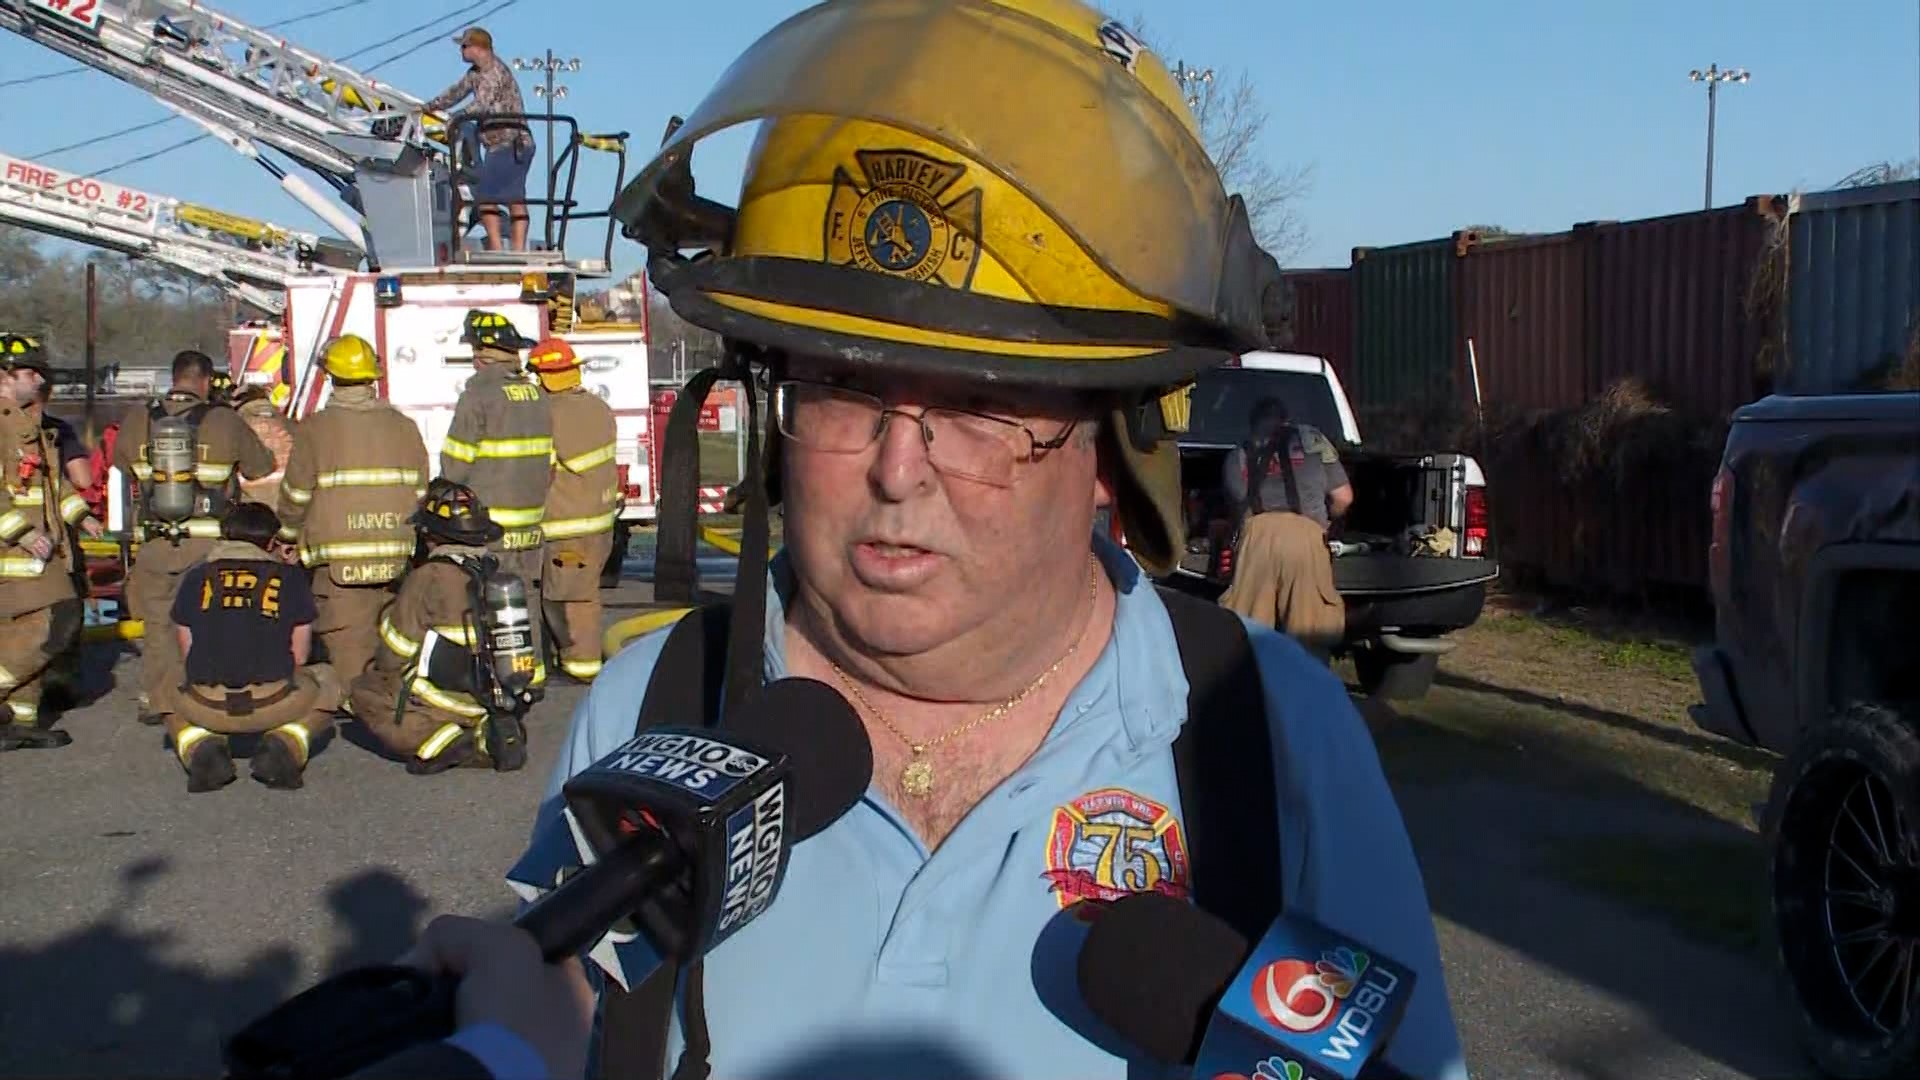 The Harvey Volunteer Fire Company No. 2 Captain Michael McAuliffe talks to media from the scene of a burning home on in the 2000 block of Estalote Avenue on Friday.